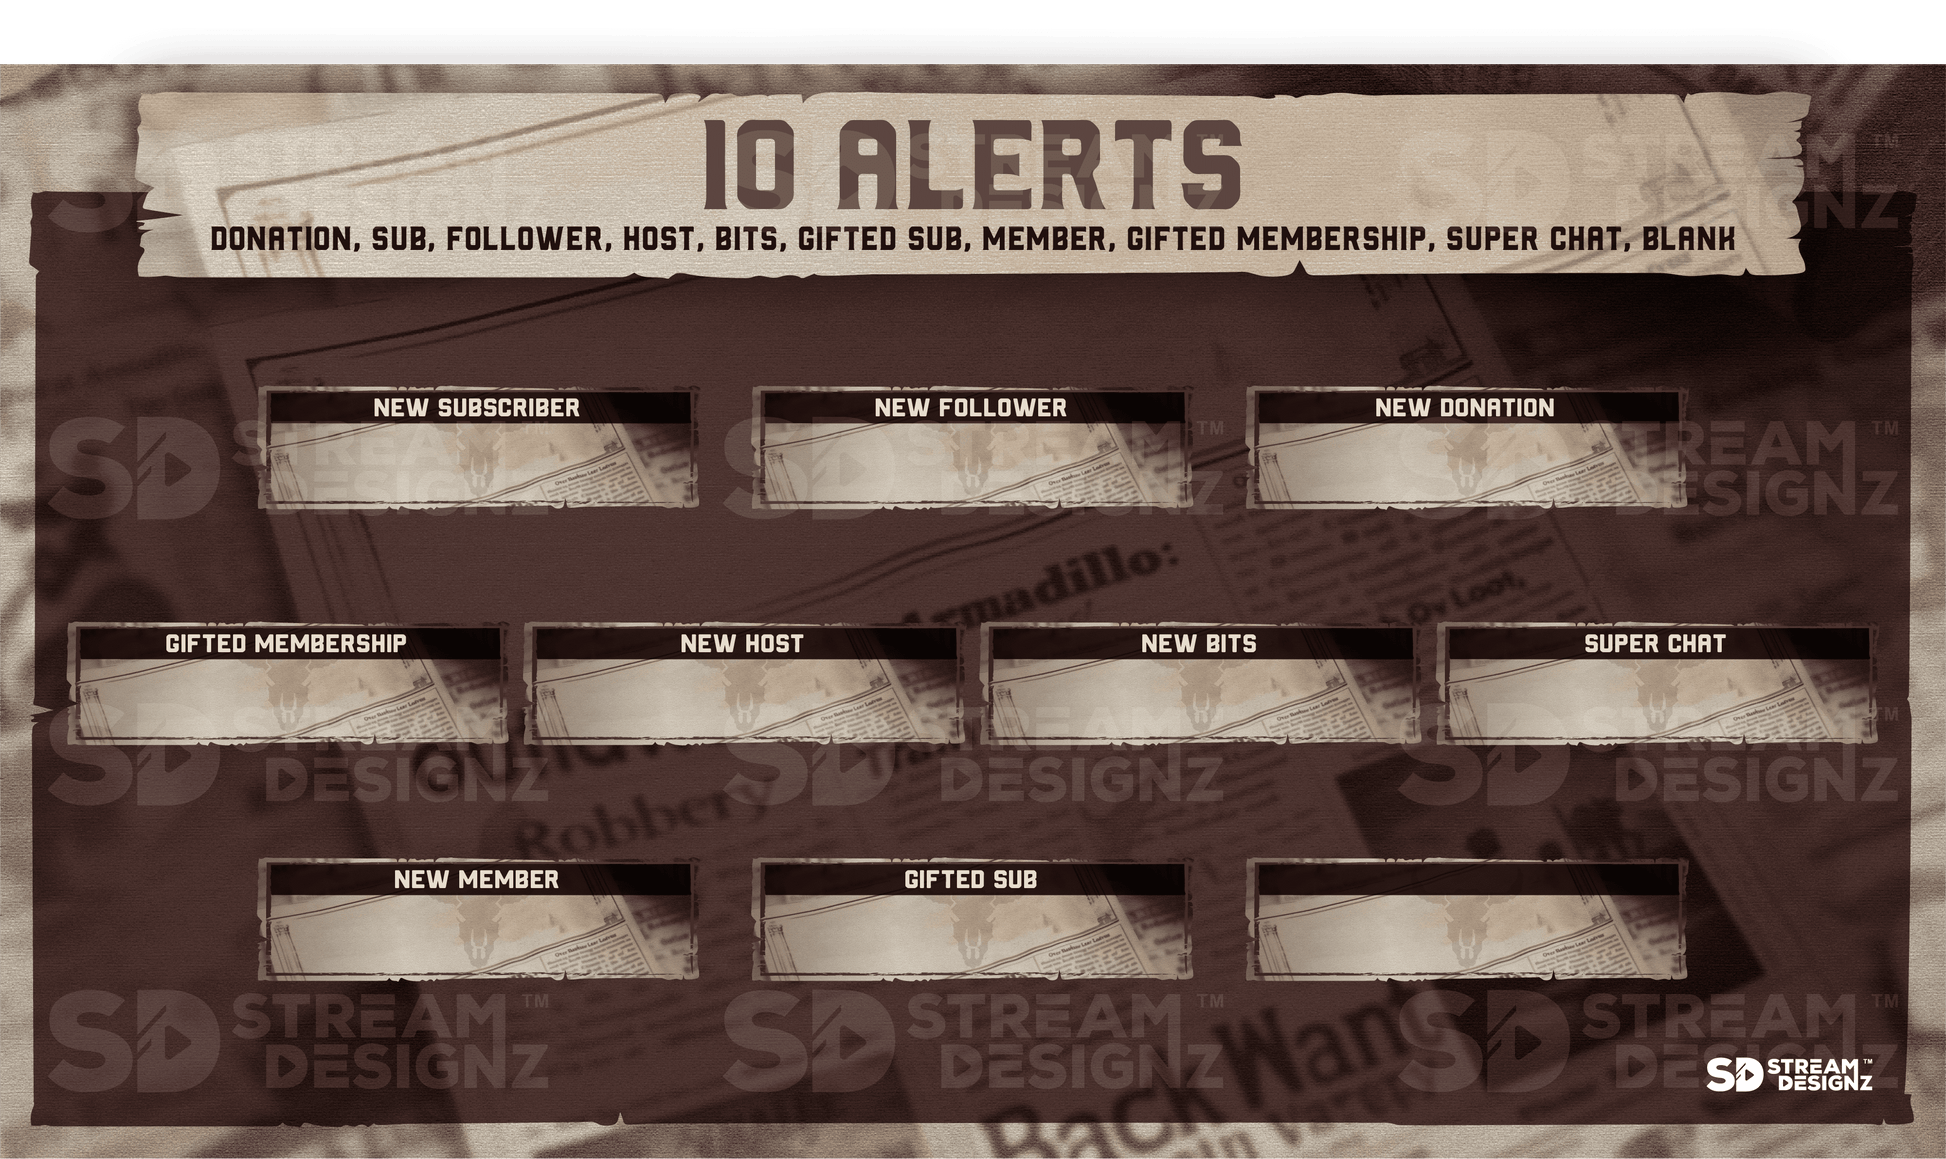 animated stream overlay package 10 alerts outlaw stream designz